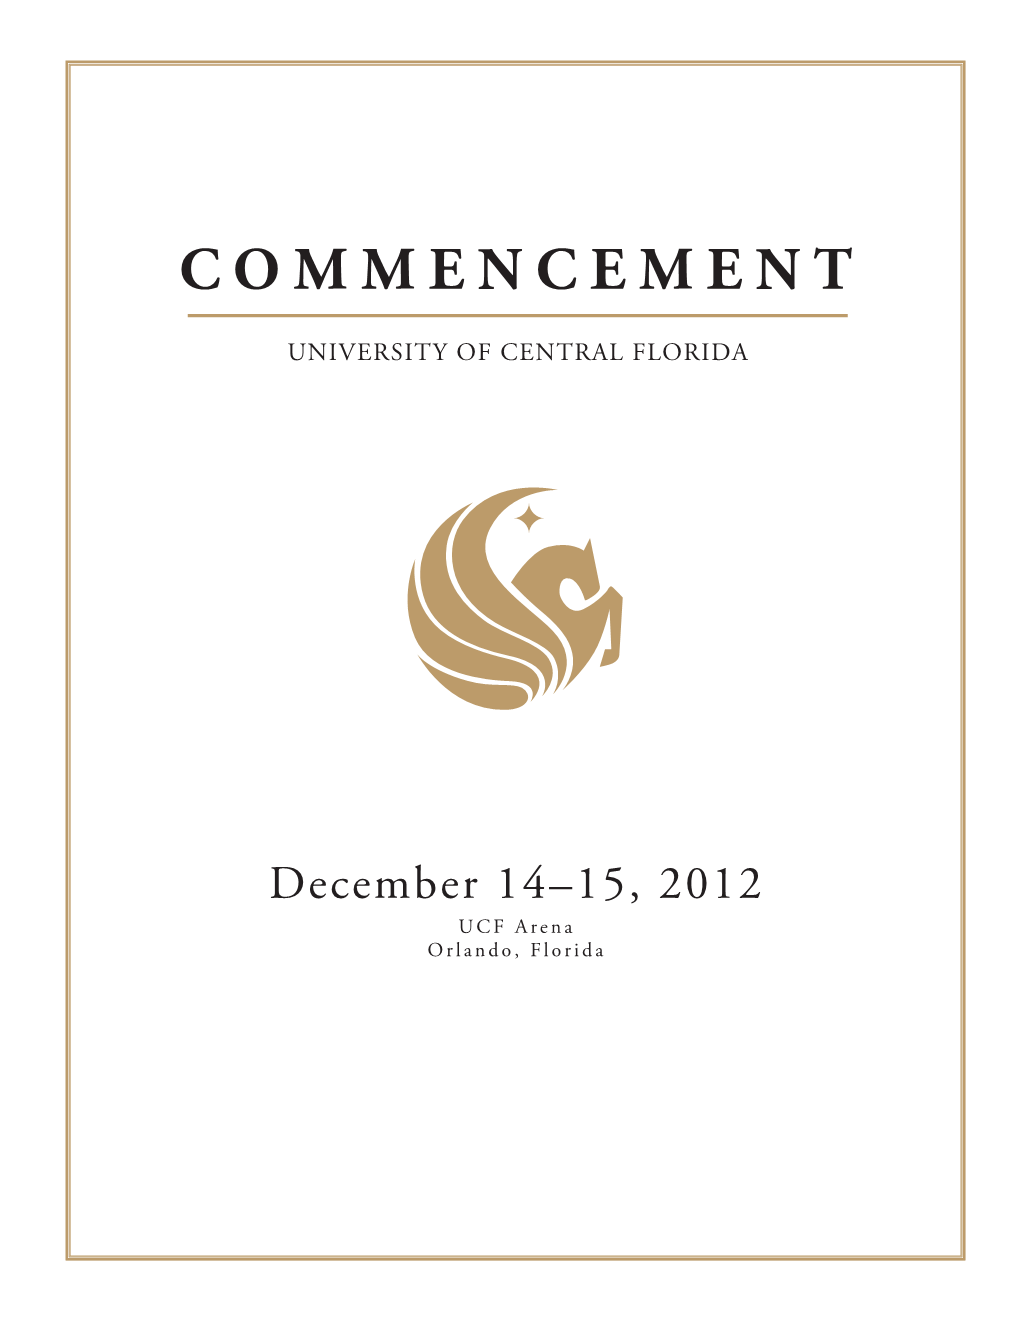 Commencement Program Will Be Available at for Download As a PDF Beginning Monday, December 17, 2012